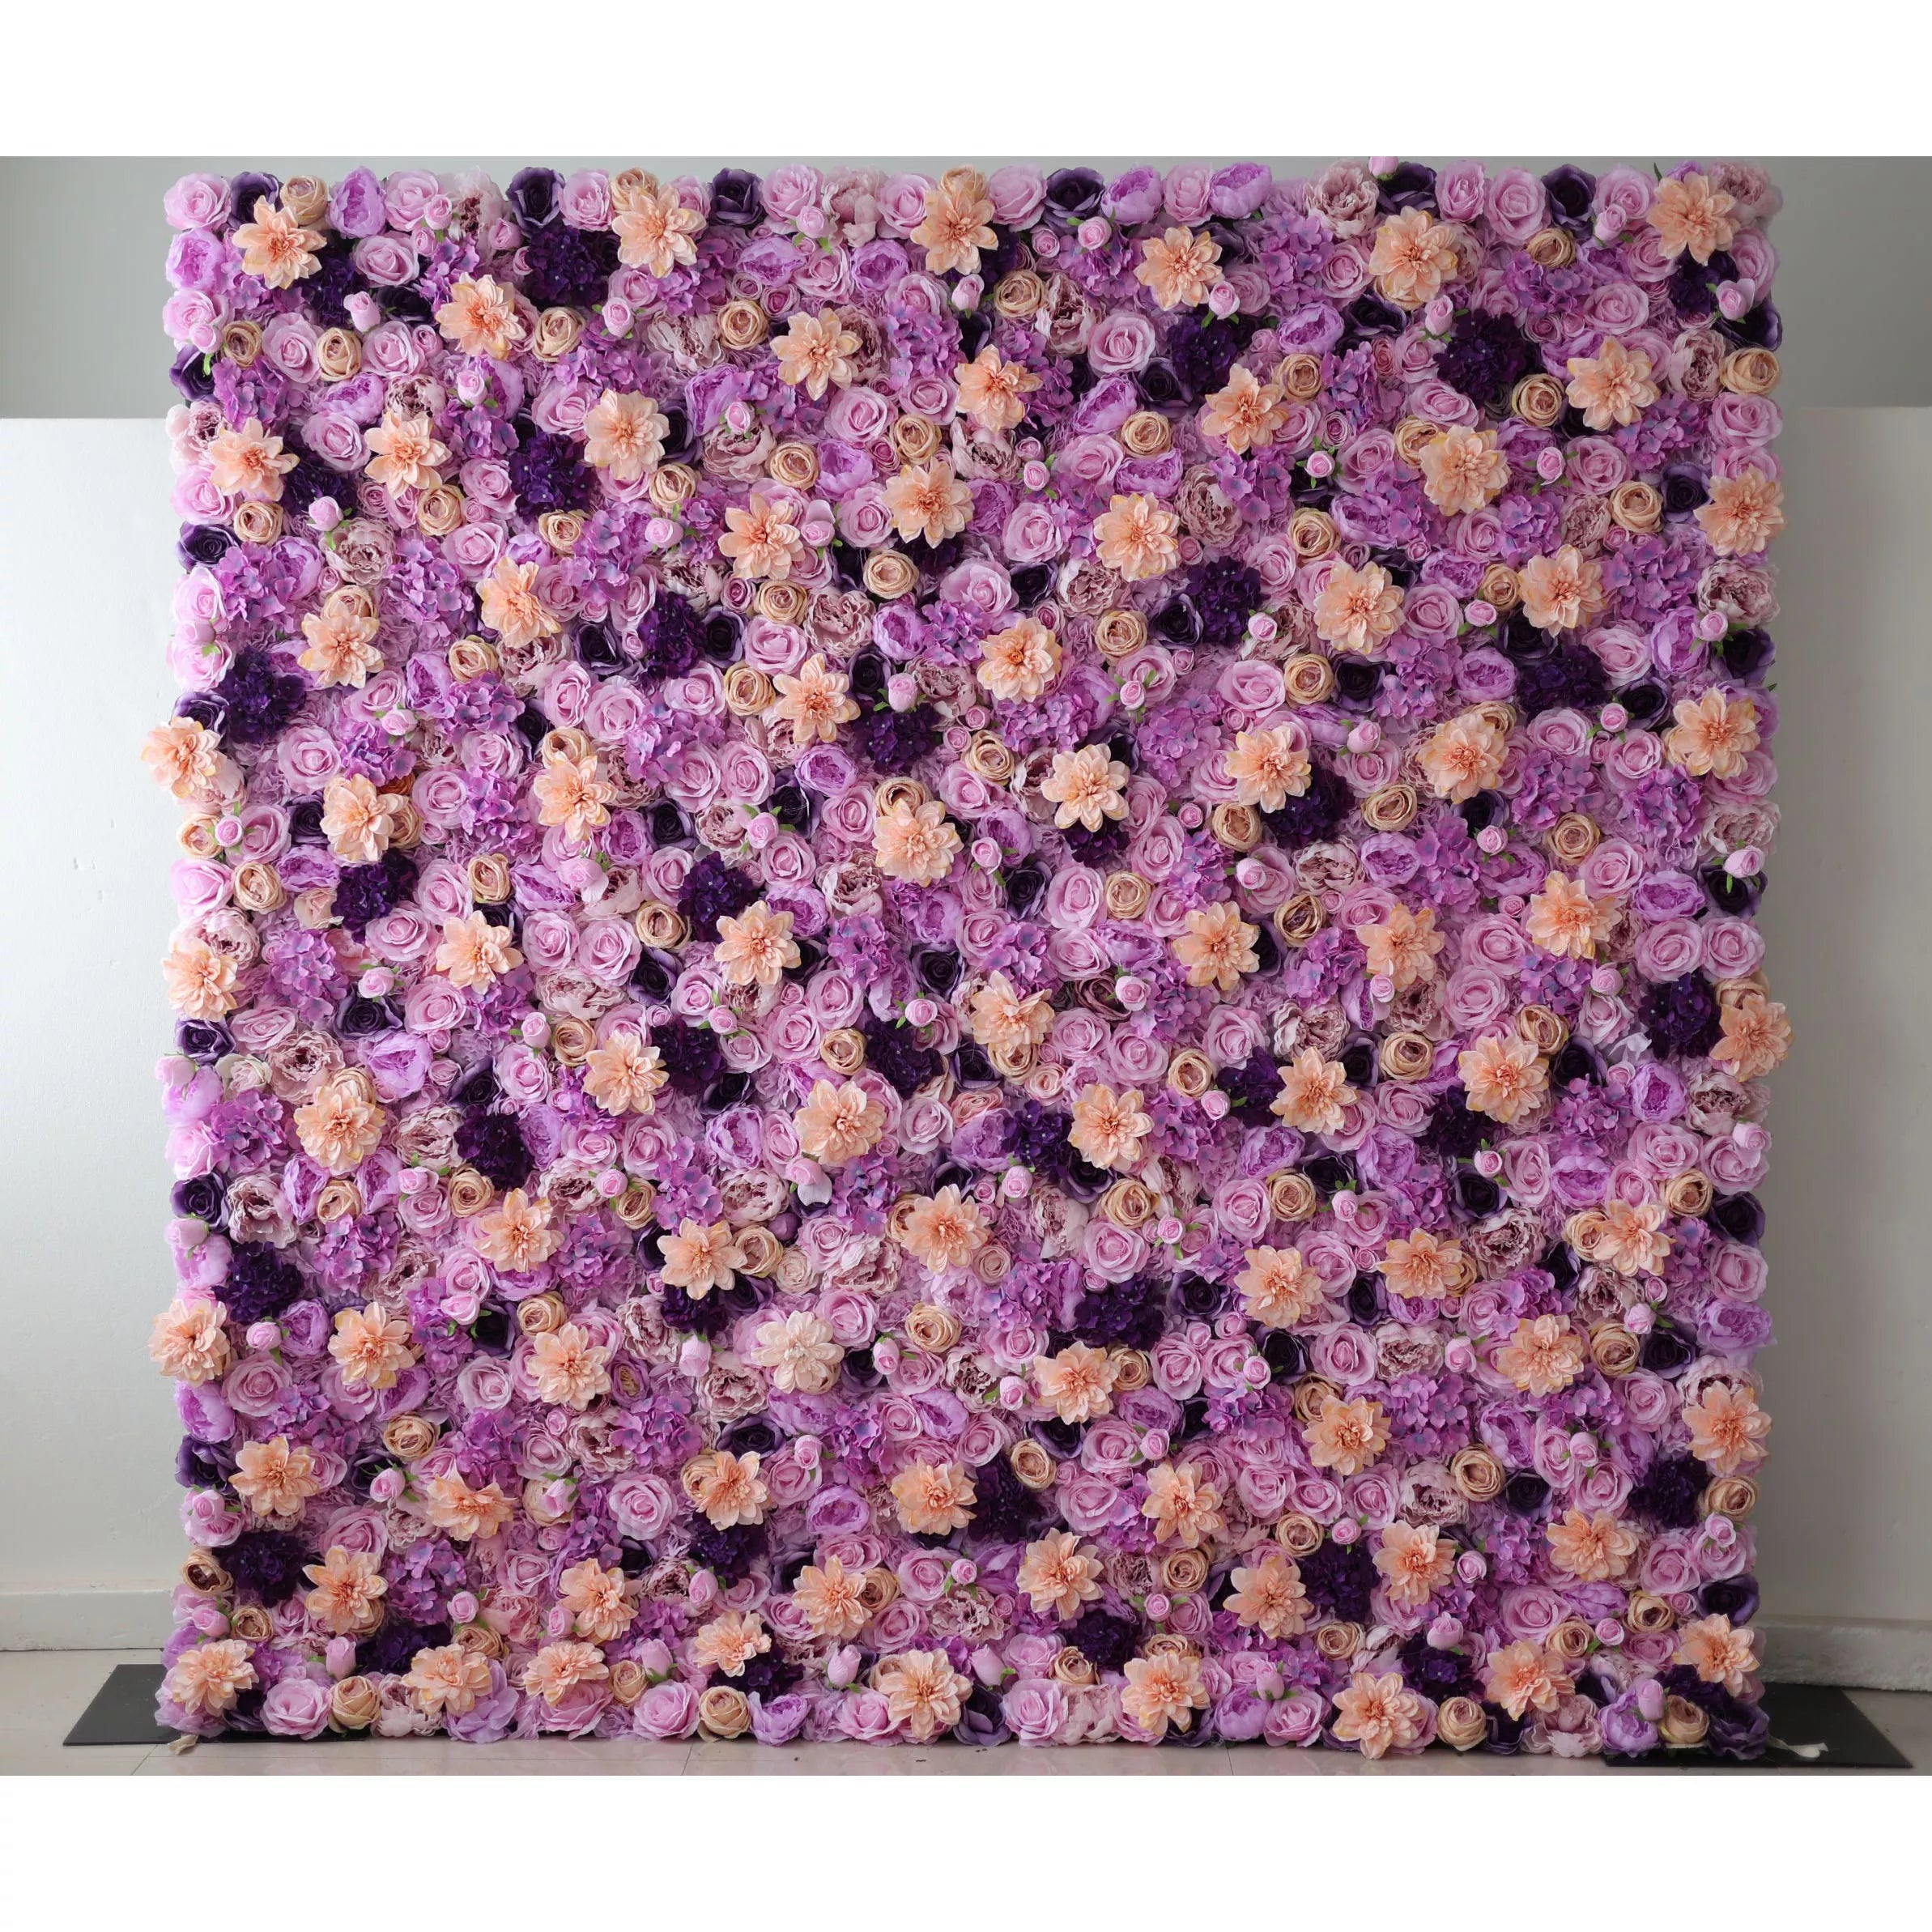 Valar Flowers Lavender Dreamscape: A Lush Symphony of Violet & Peach Blooms – Ultimate Elegance in Floral Artistry-VF-206